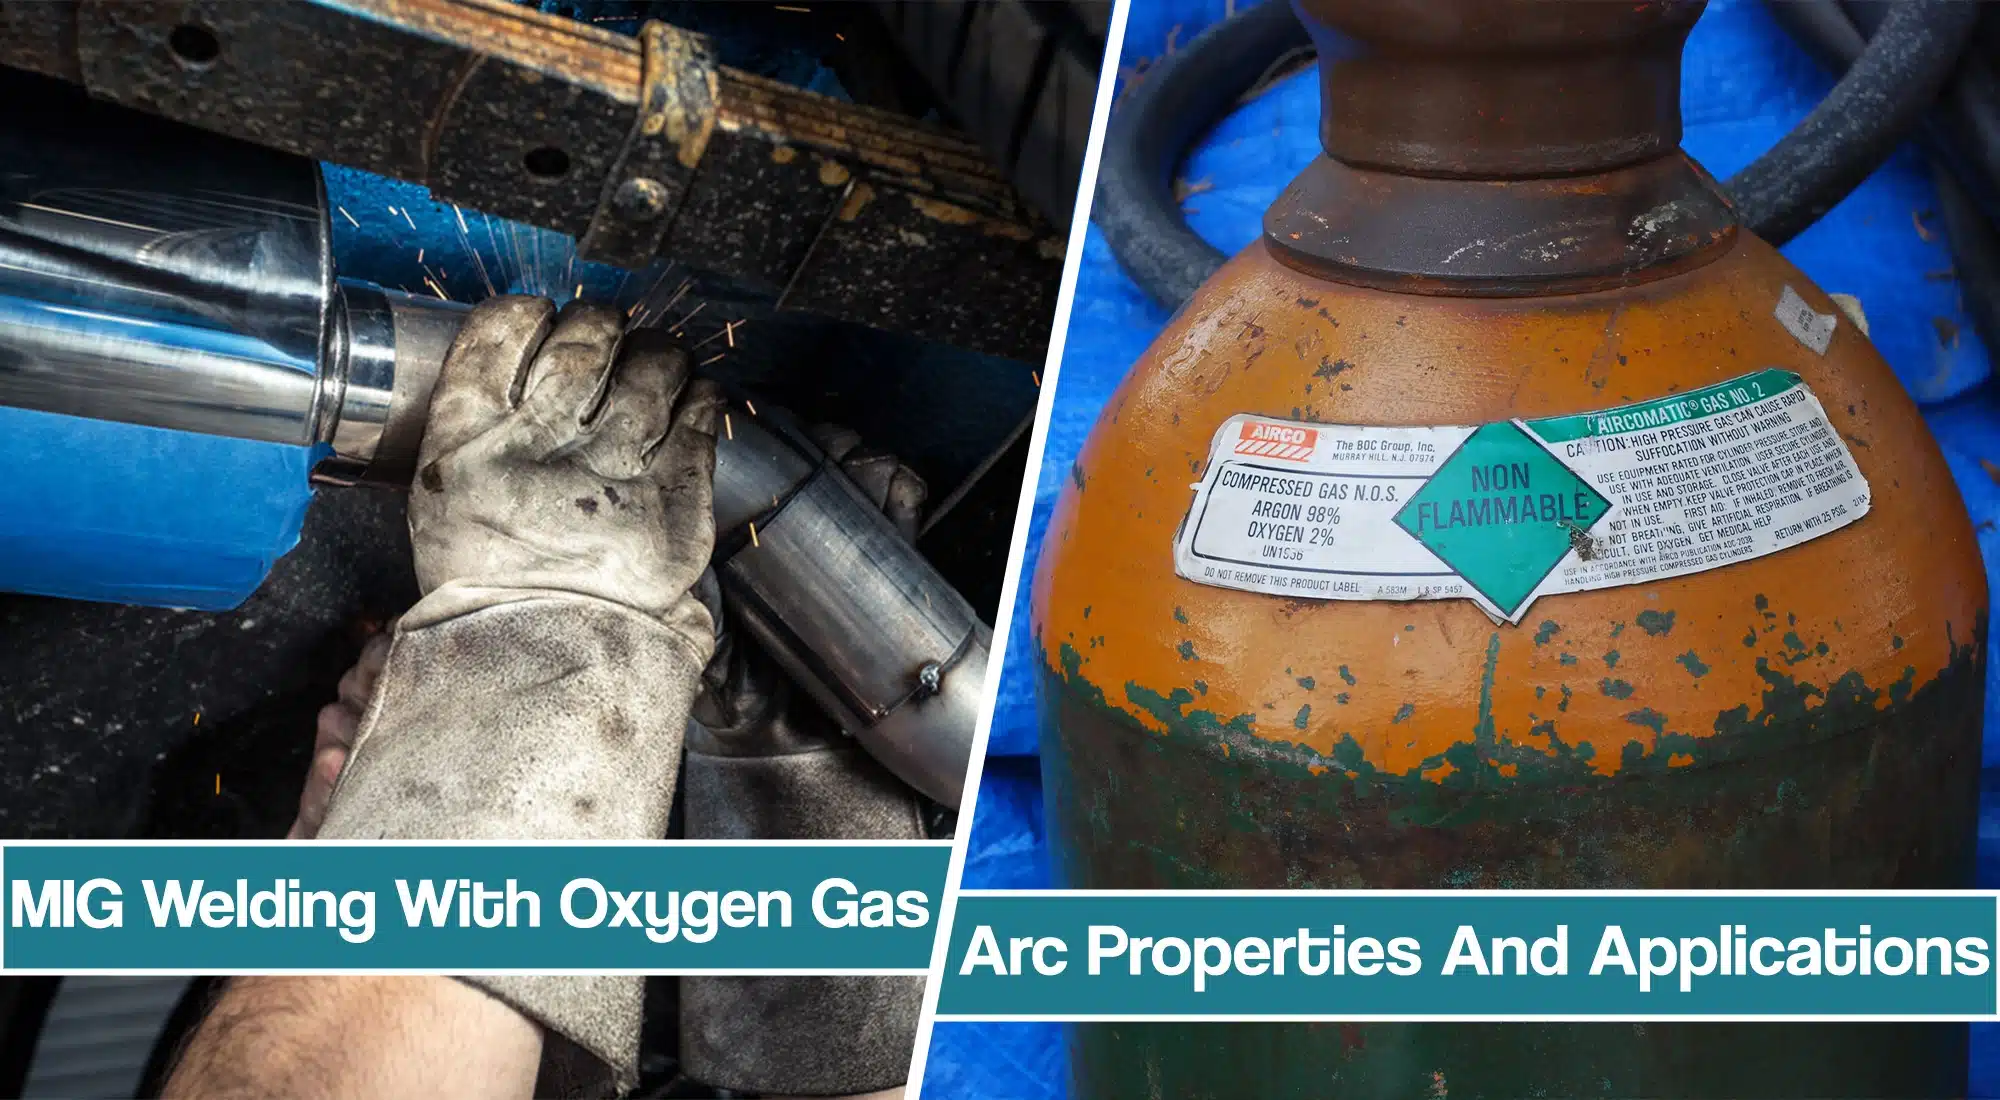 MIG Welding With Oxygen Gas